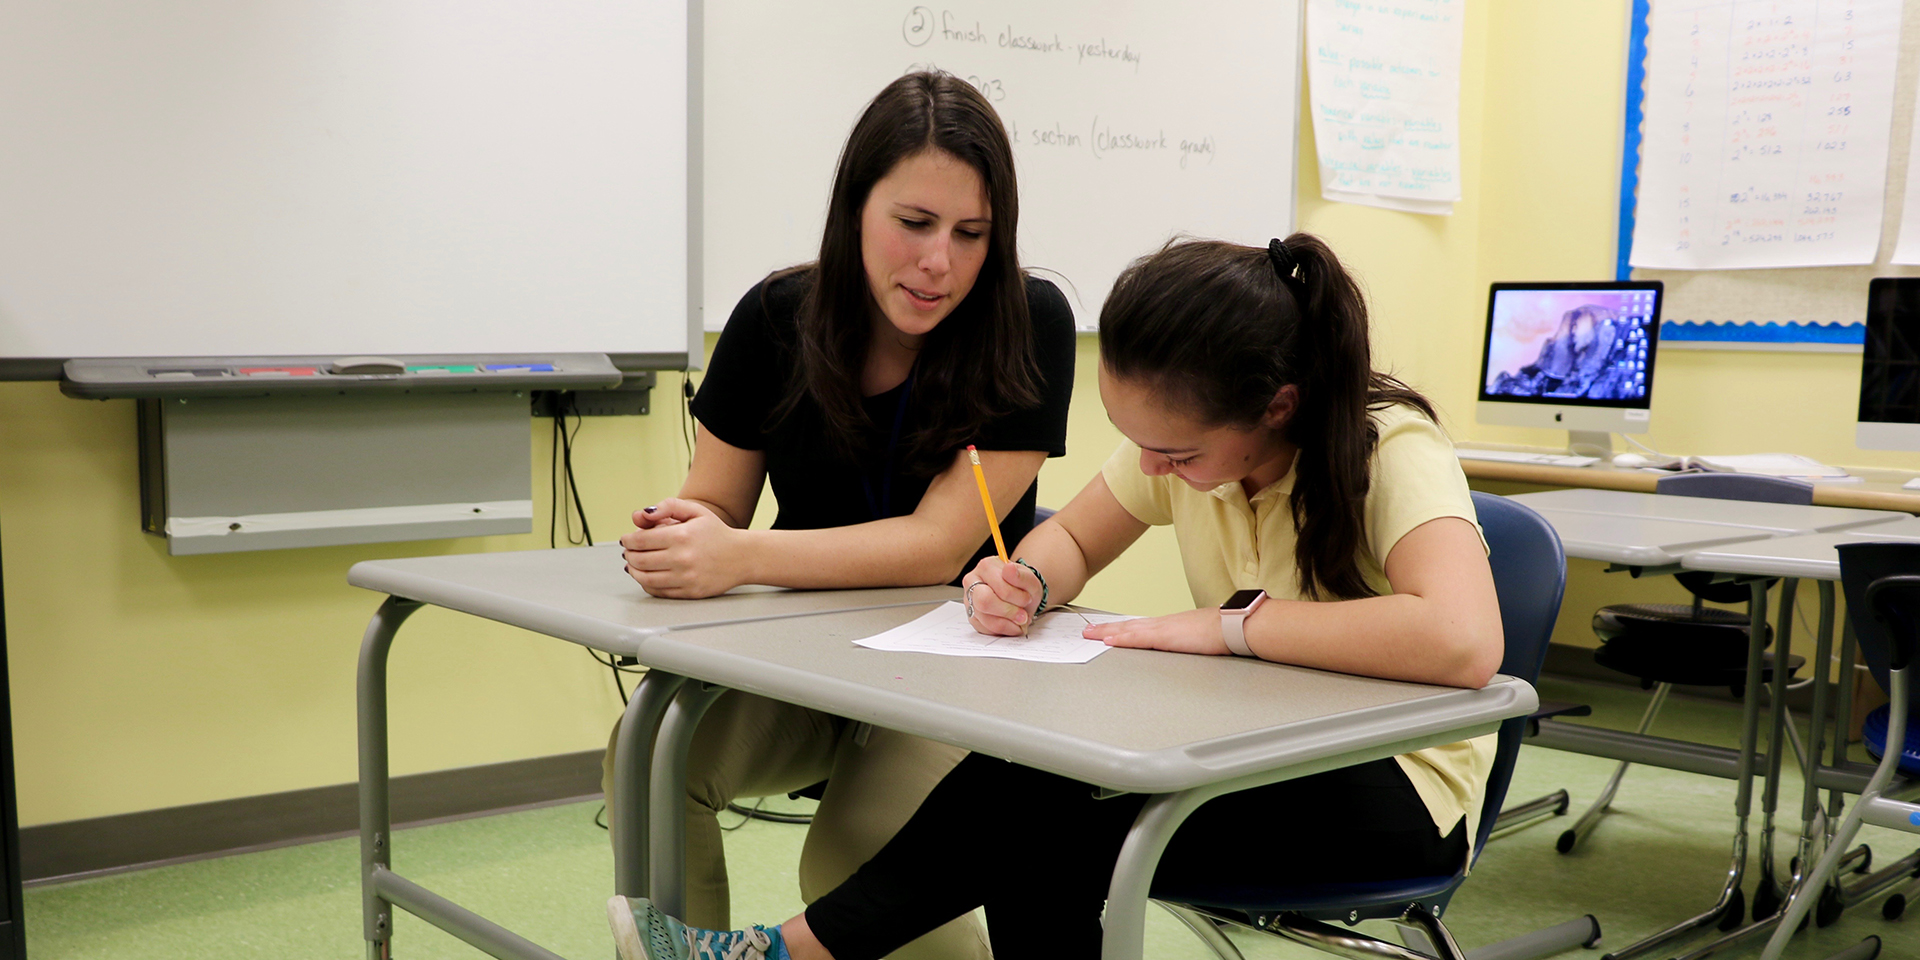 Teacher helps student with a writing assignment